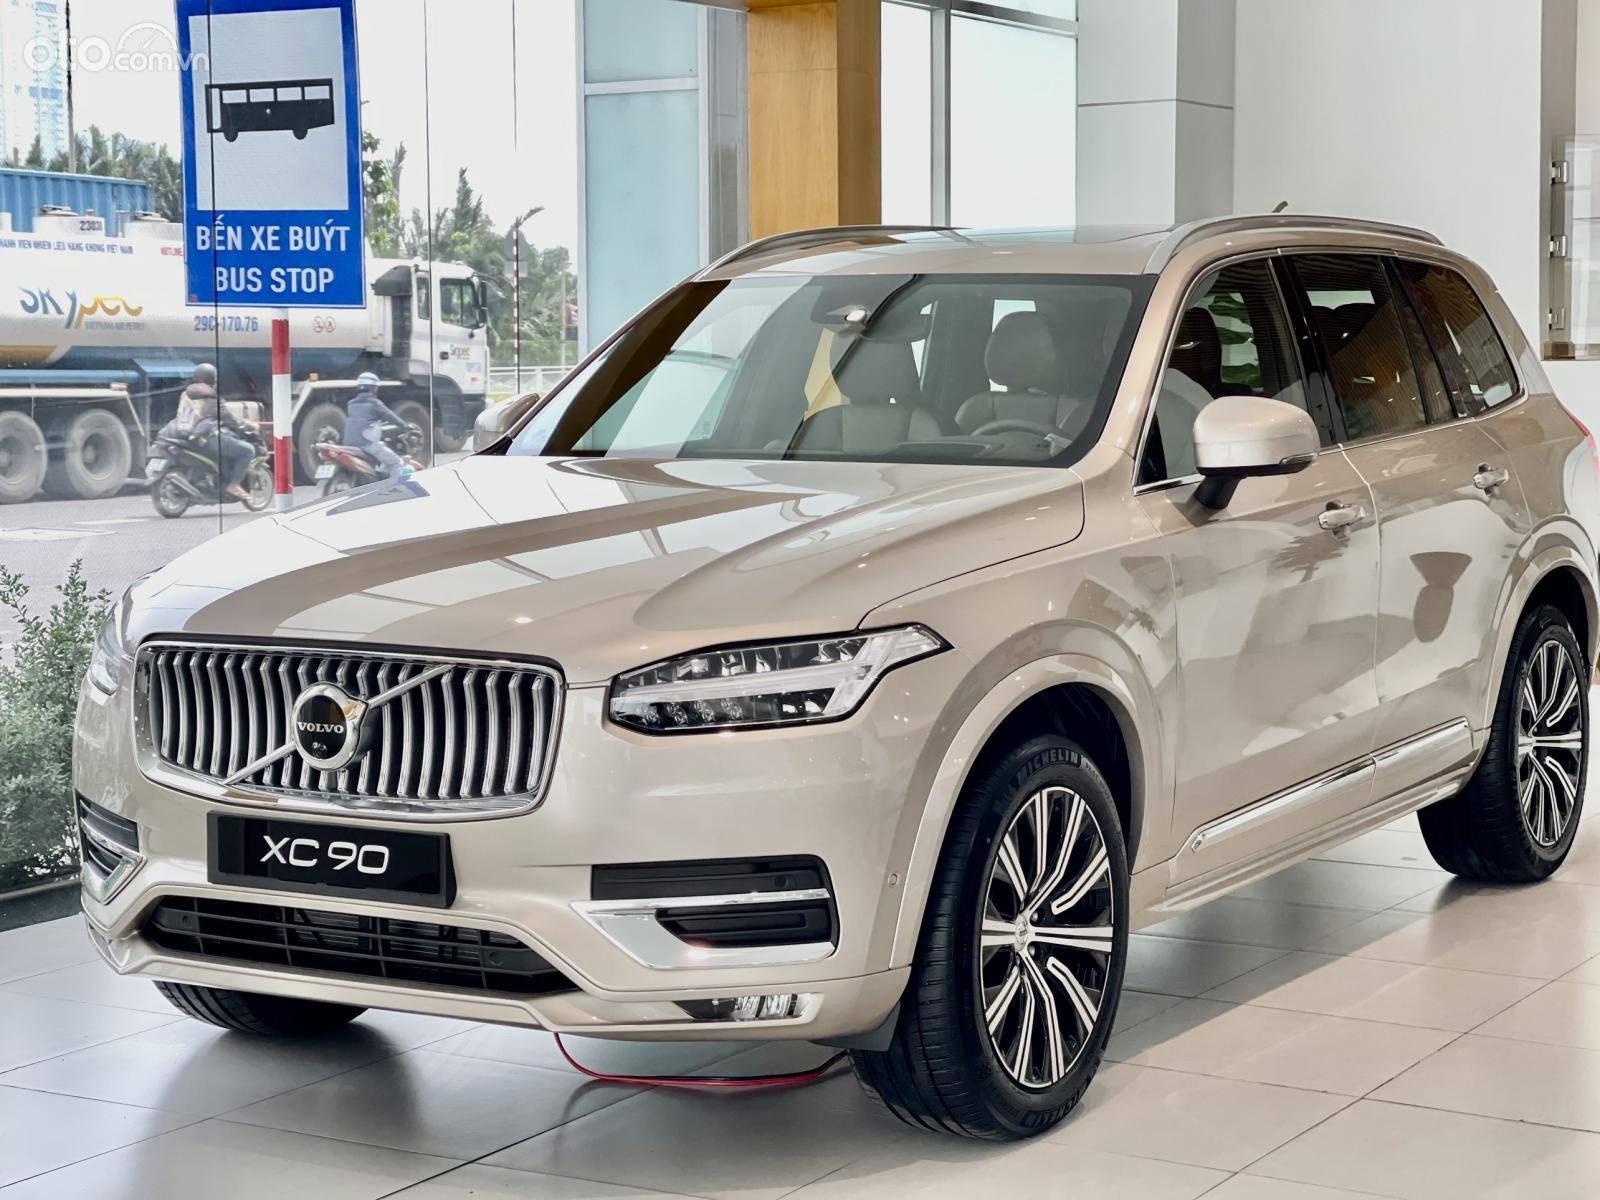 Volvo XC90 | The Car Specialists | South Yorkshire